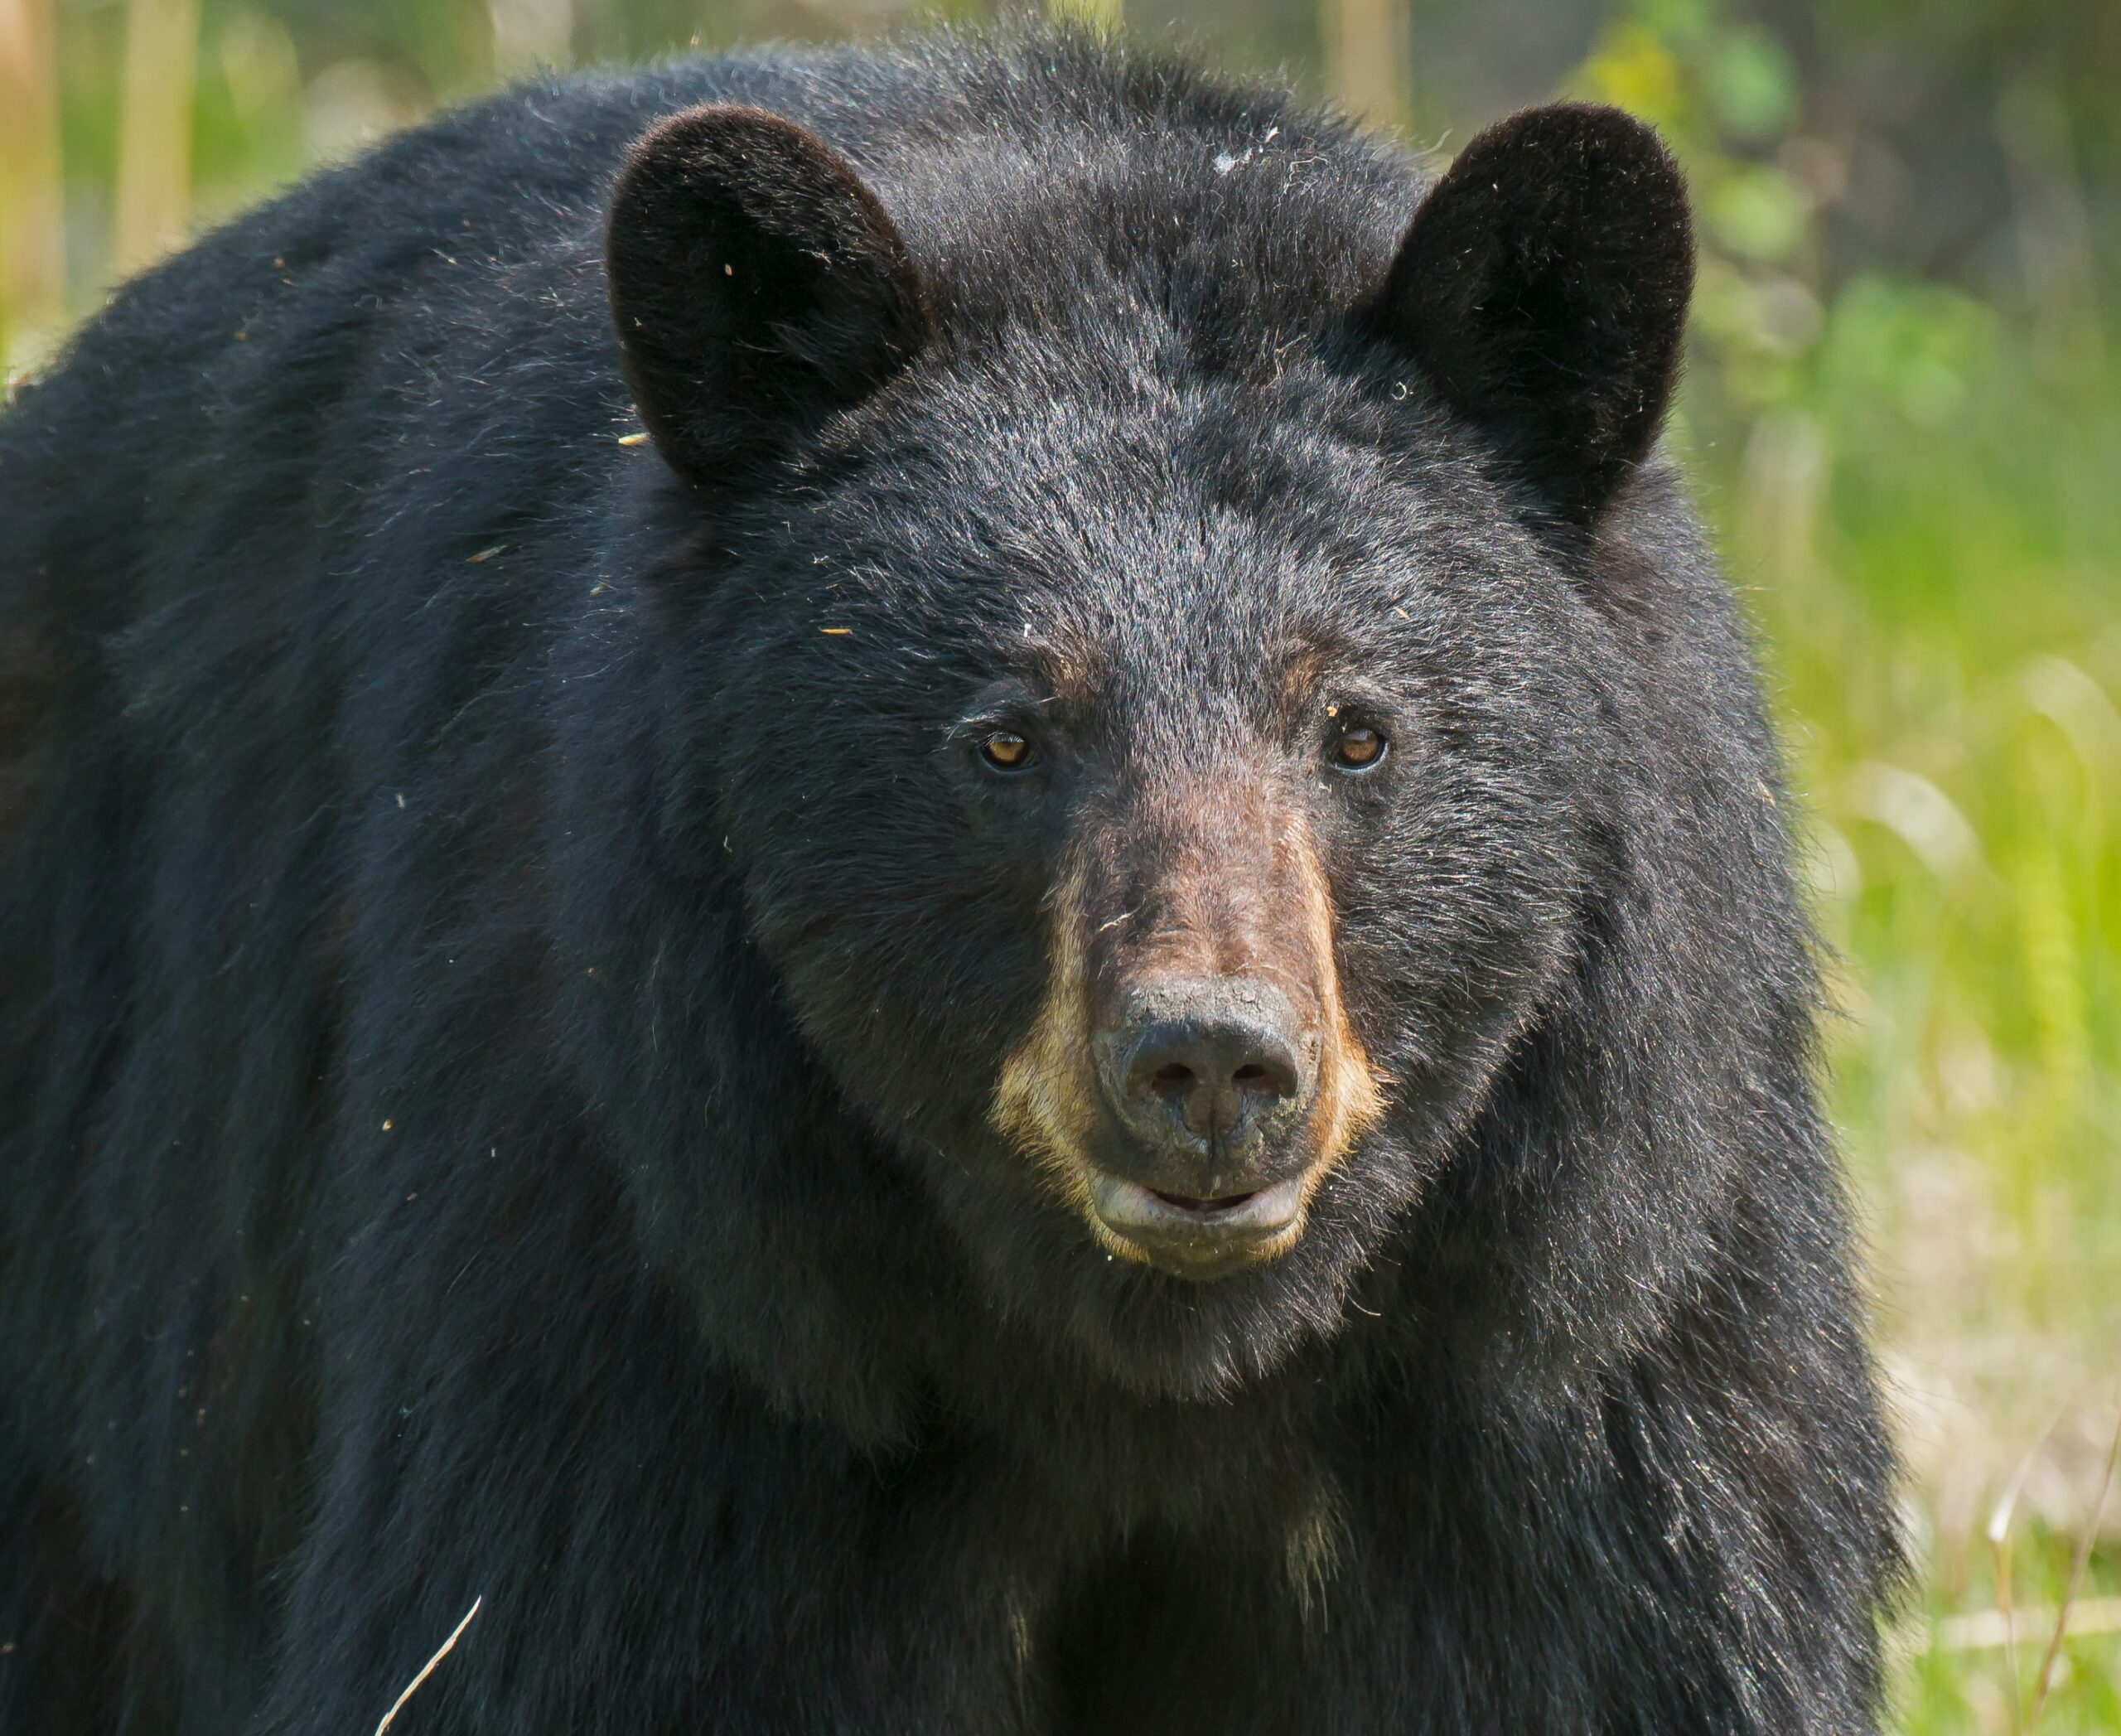 close up of black bear's face in the forest